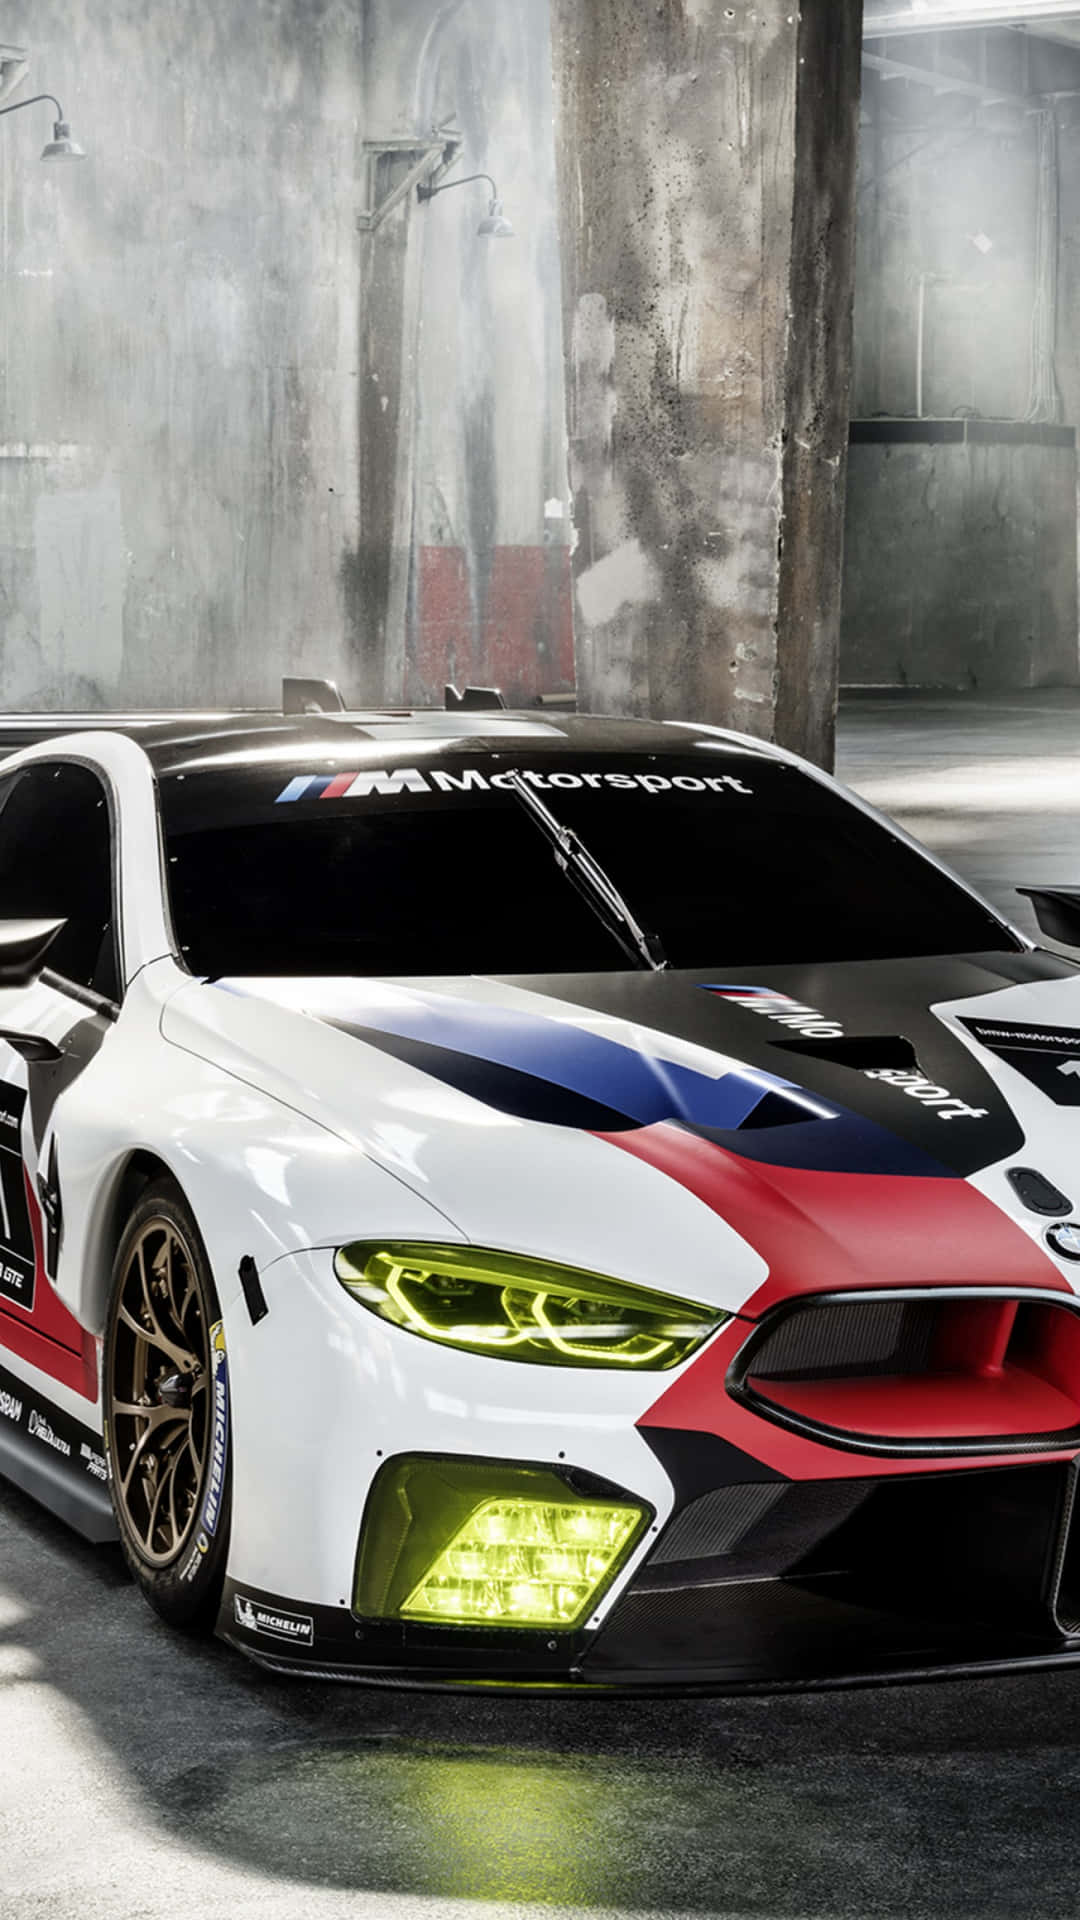 The Ultimate Luxury Reimagined: BMW M8 Wallpaper